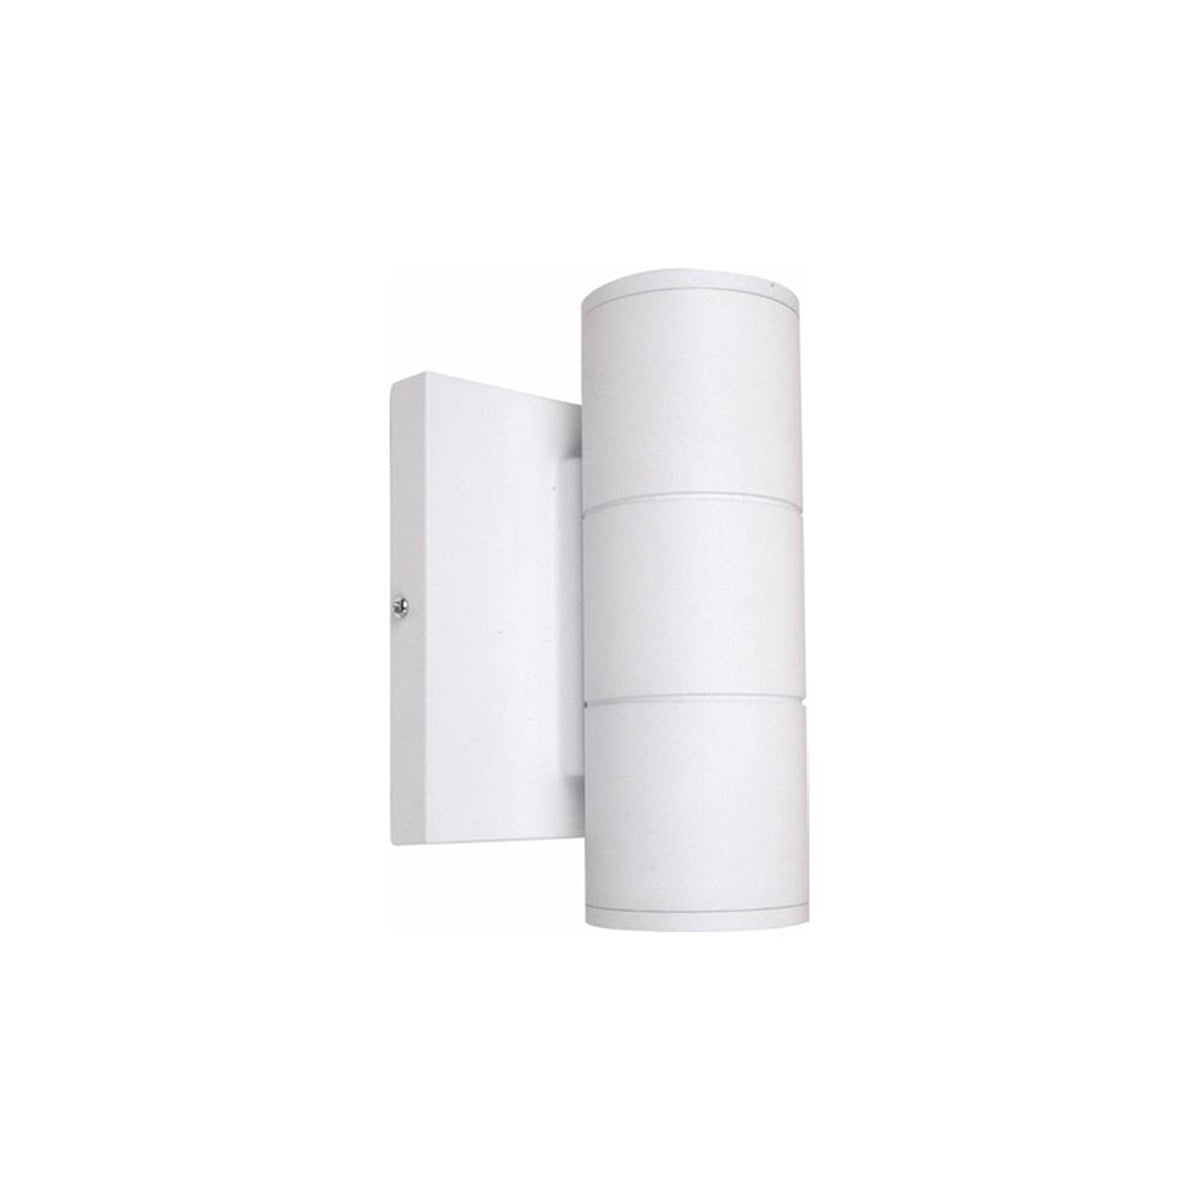 7 In 2 Lights LED Outdoor Cylinder Wall Light Up/Down Lights 3000K White Finish - Bees Lighting